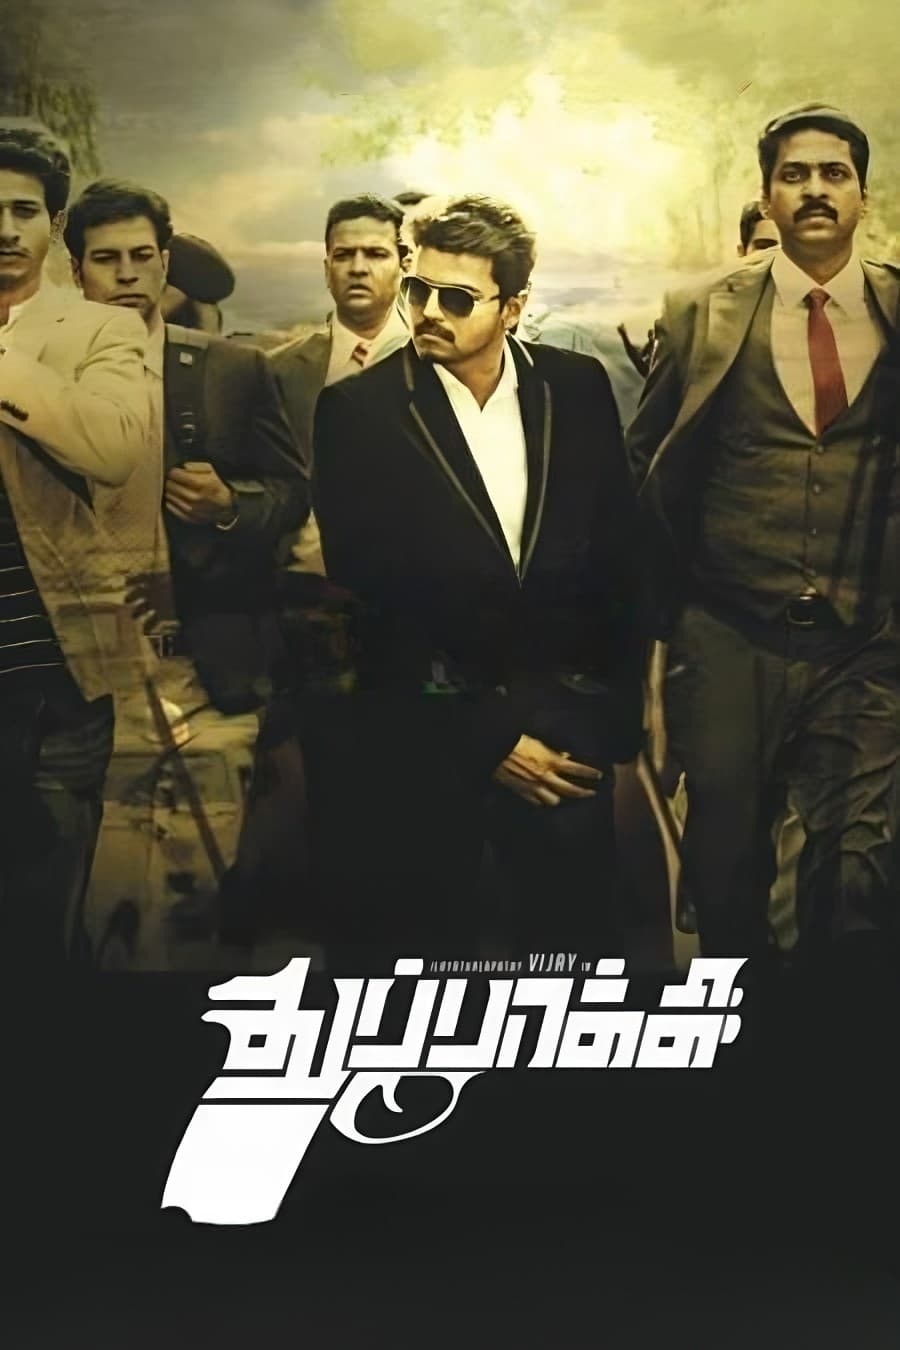 Indian Soldier Never On Holiday – Thuppakki (2012) Hindi ORG 1080p 720p 480p HDRip Download